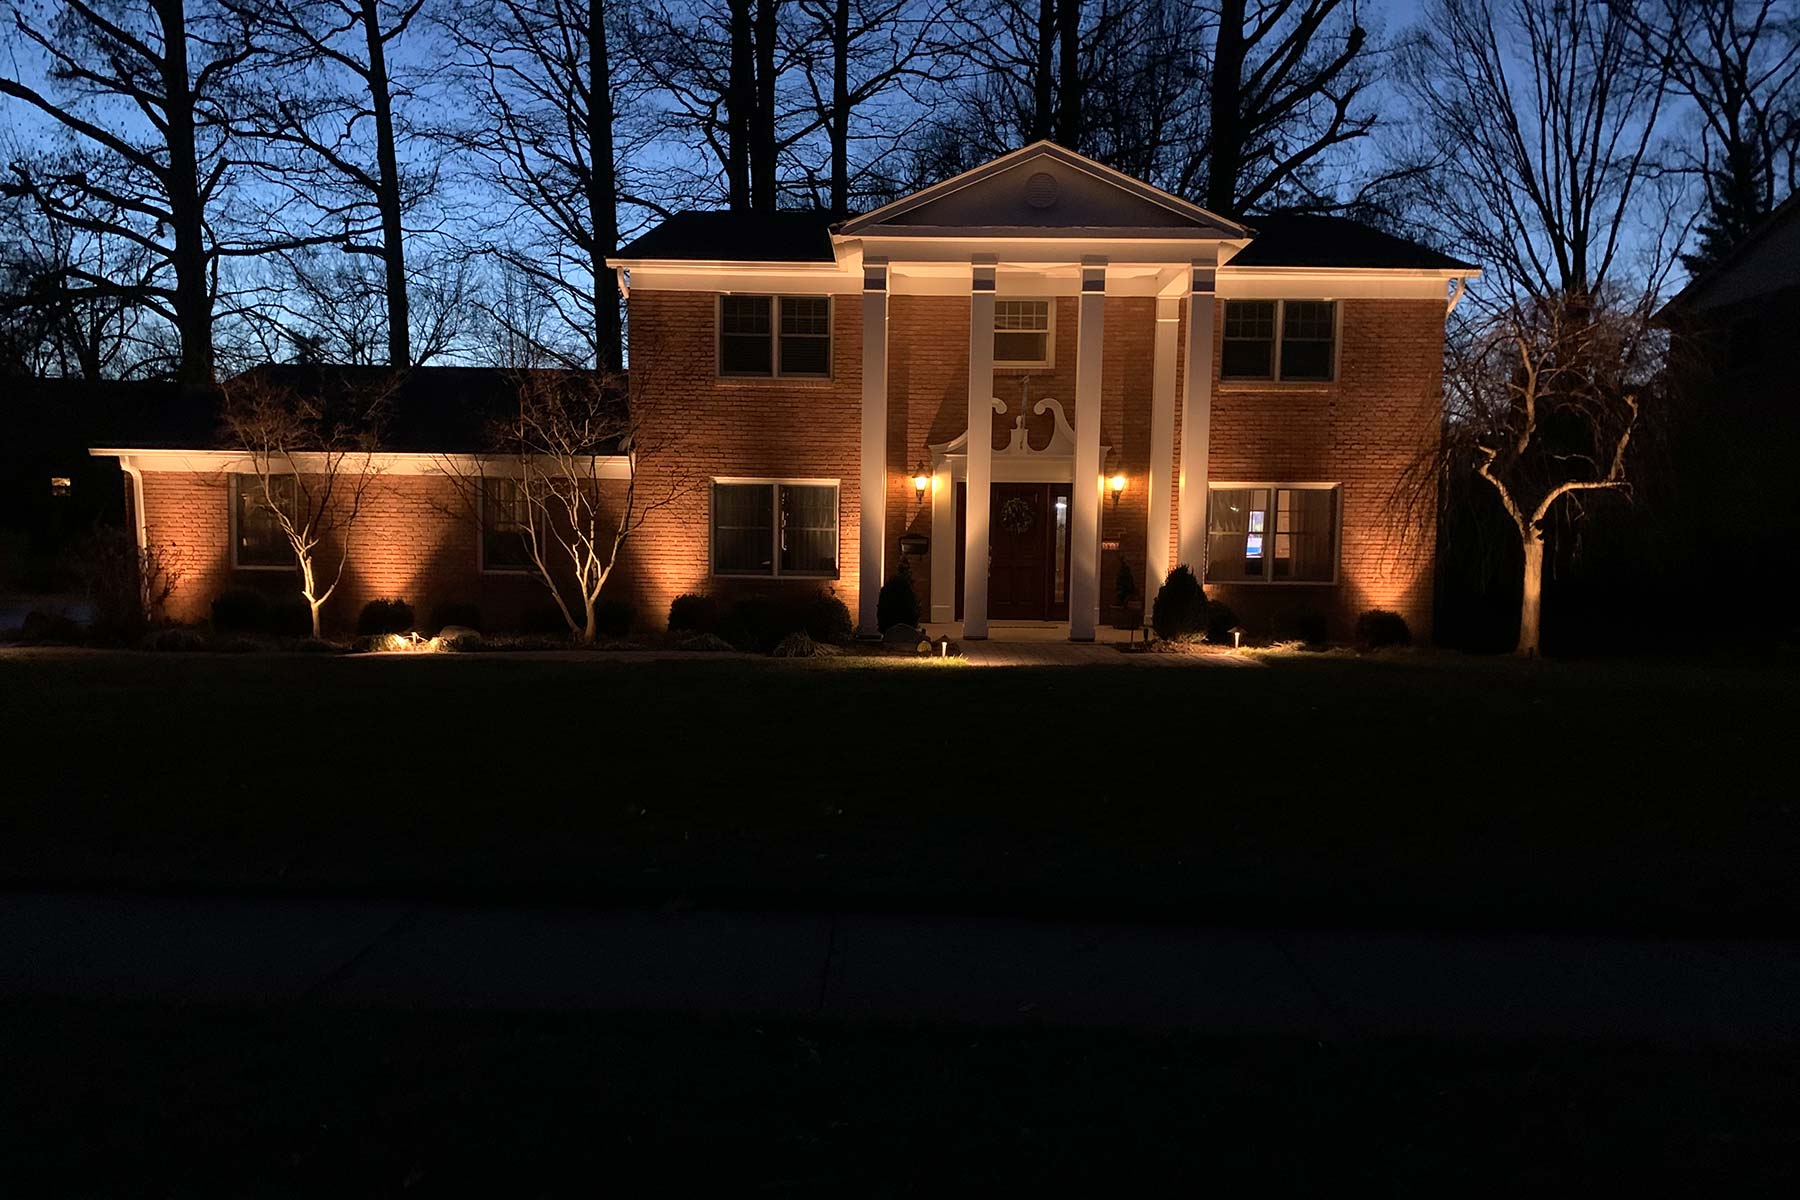 house-with-outdoor-lighting-with-trees-fort-wright-ky